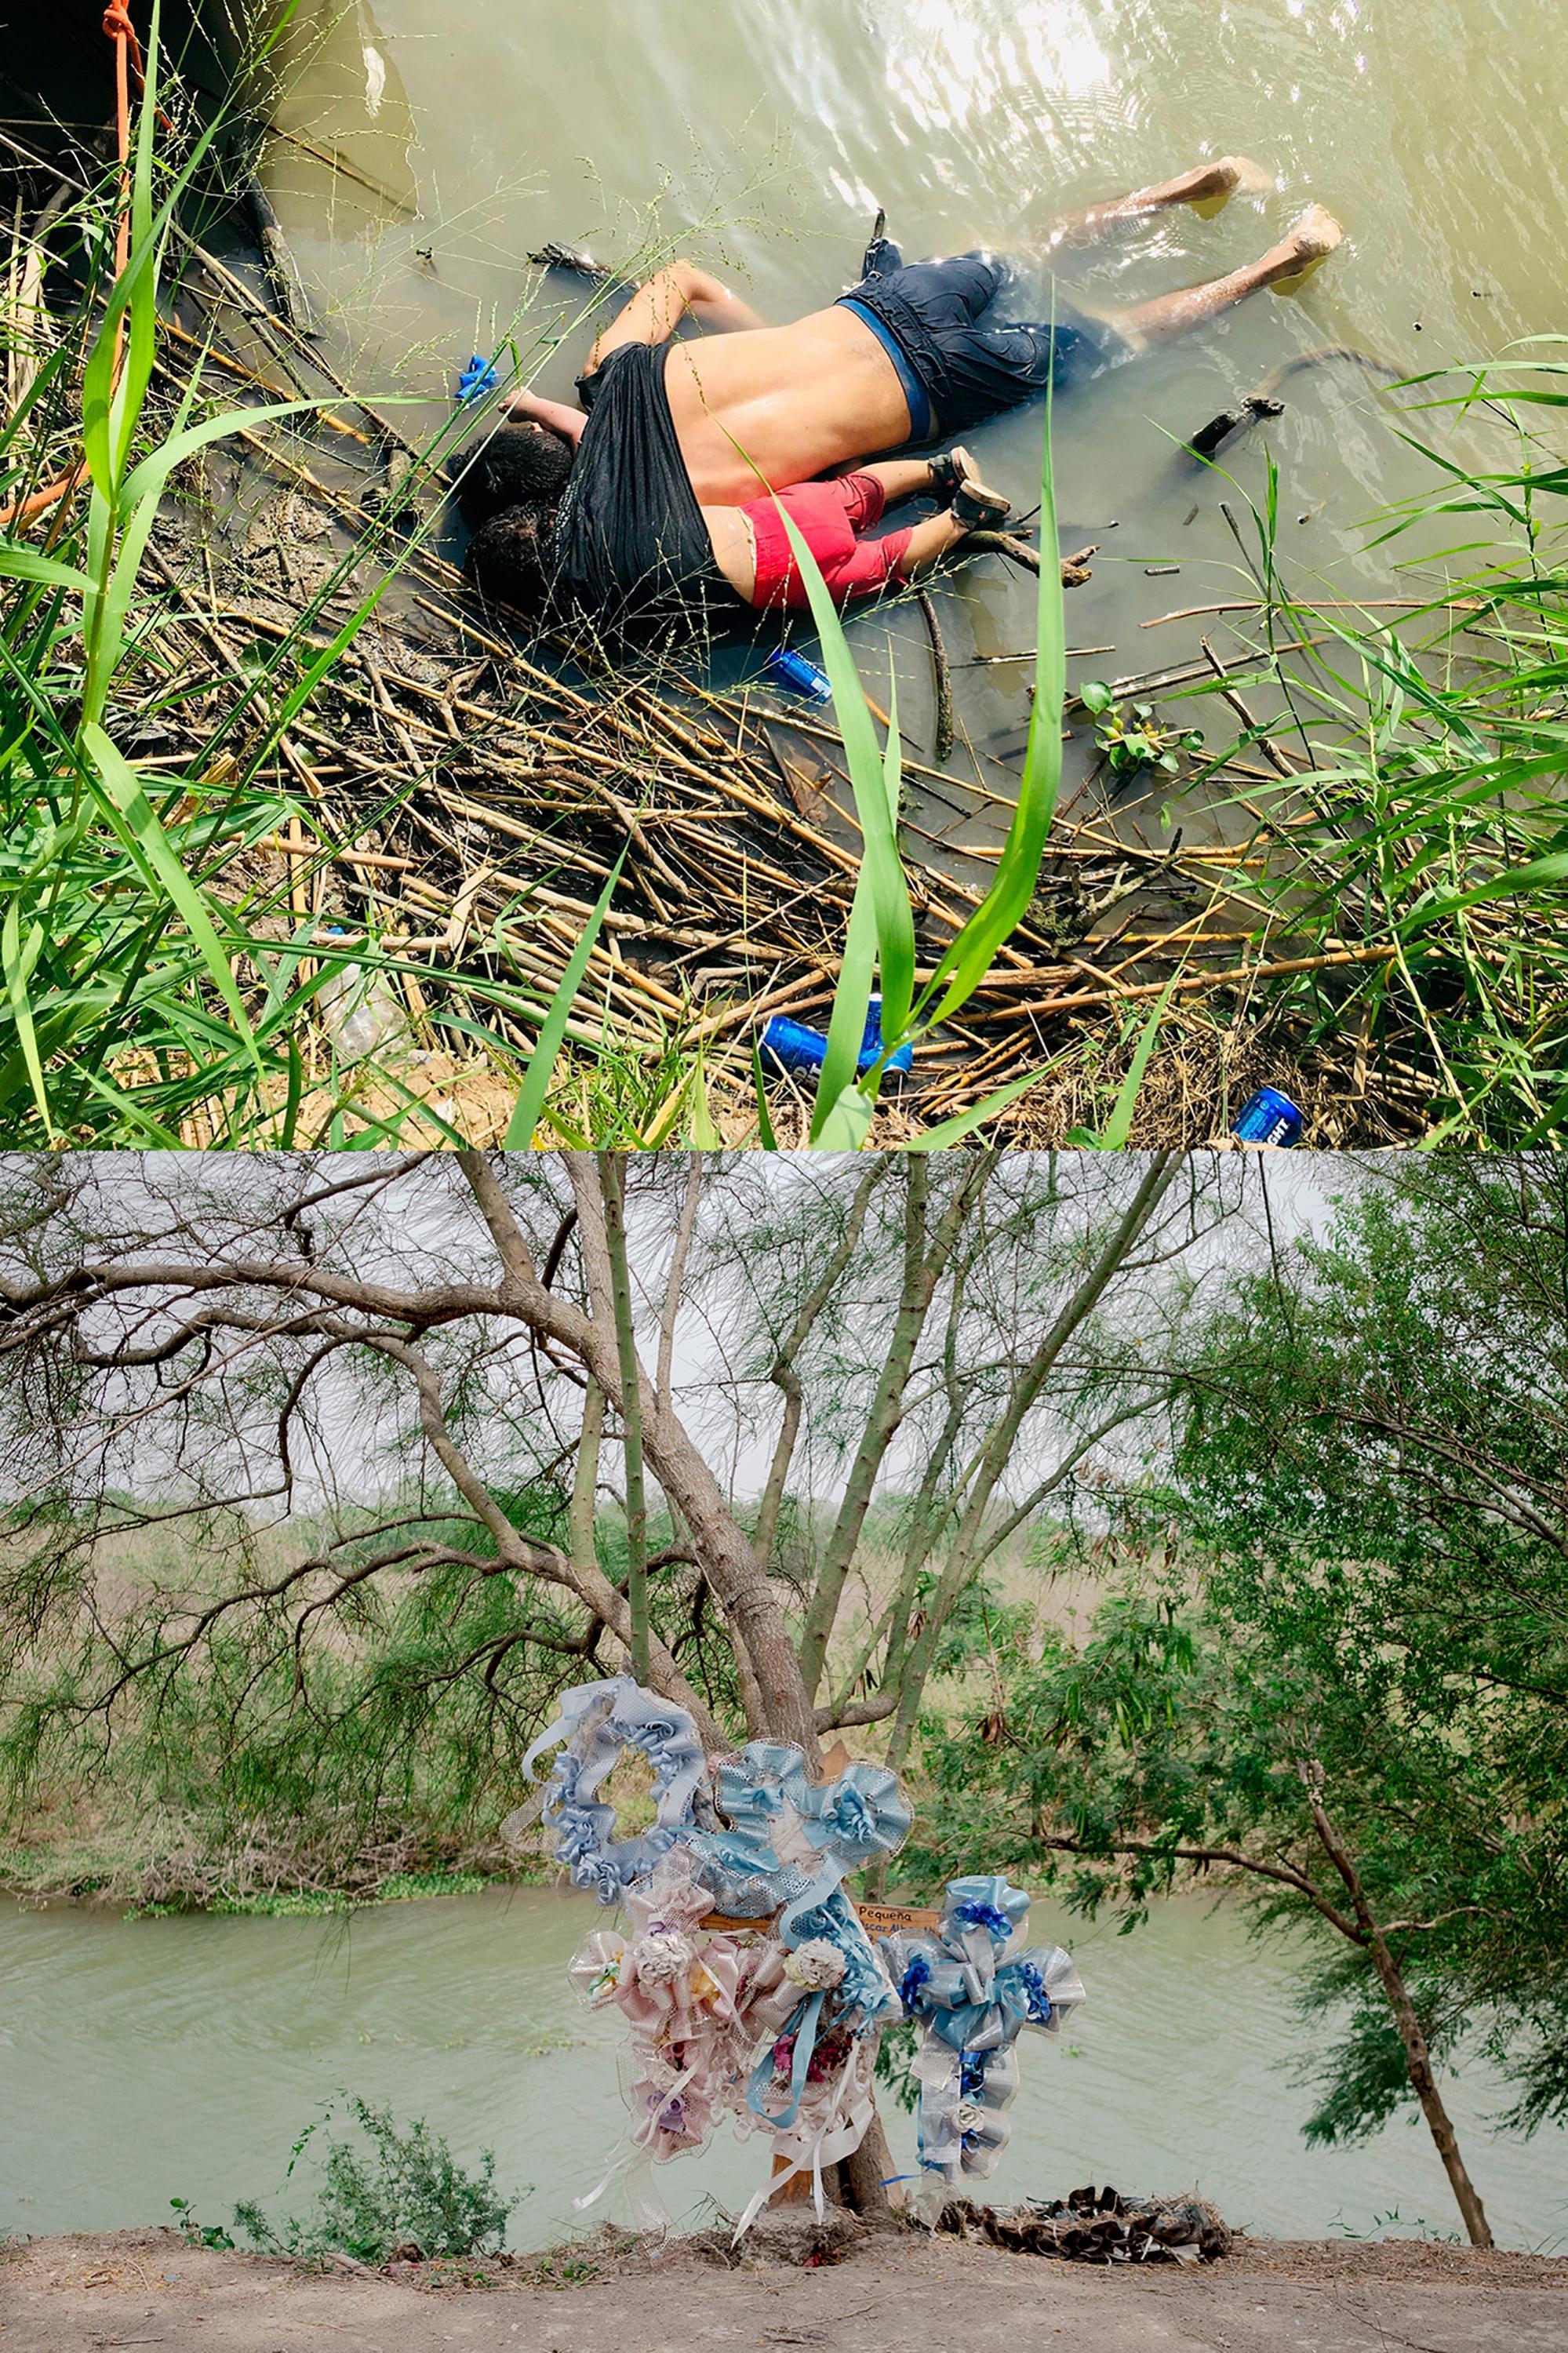 Above, the photograph taken on June 23, 2019 of the bodies of Oscar and Valeria in the Rio Bravo. Photo by AFP. Below, the place as it looks now where the bodies were found.